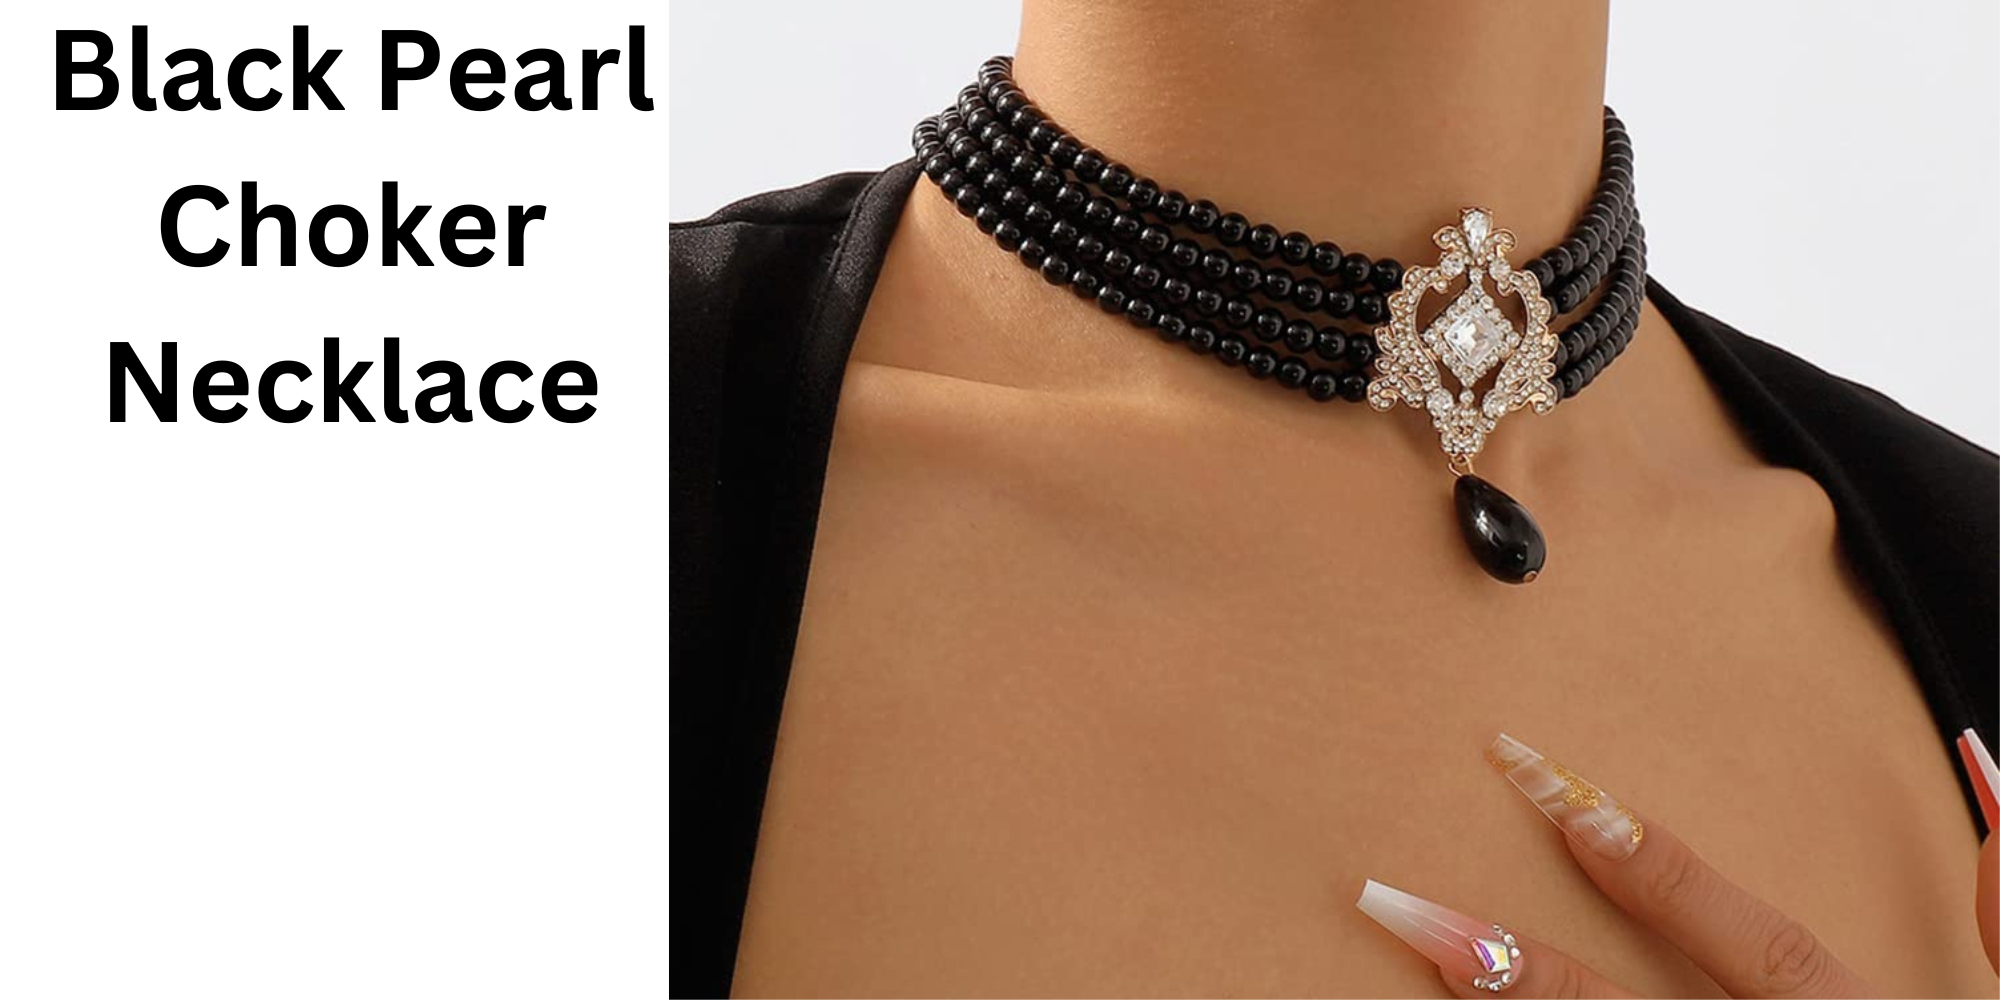  Black Pearl Choker Necklace from amazon click hear to order 